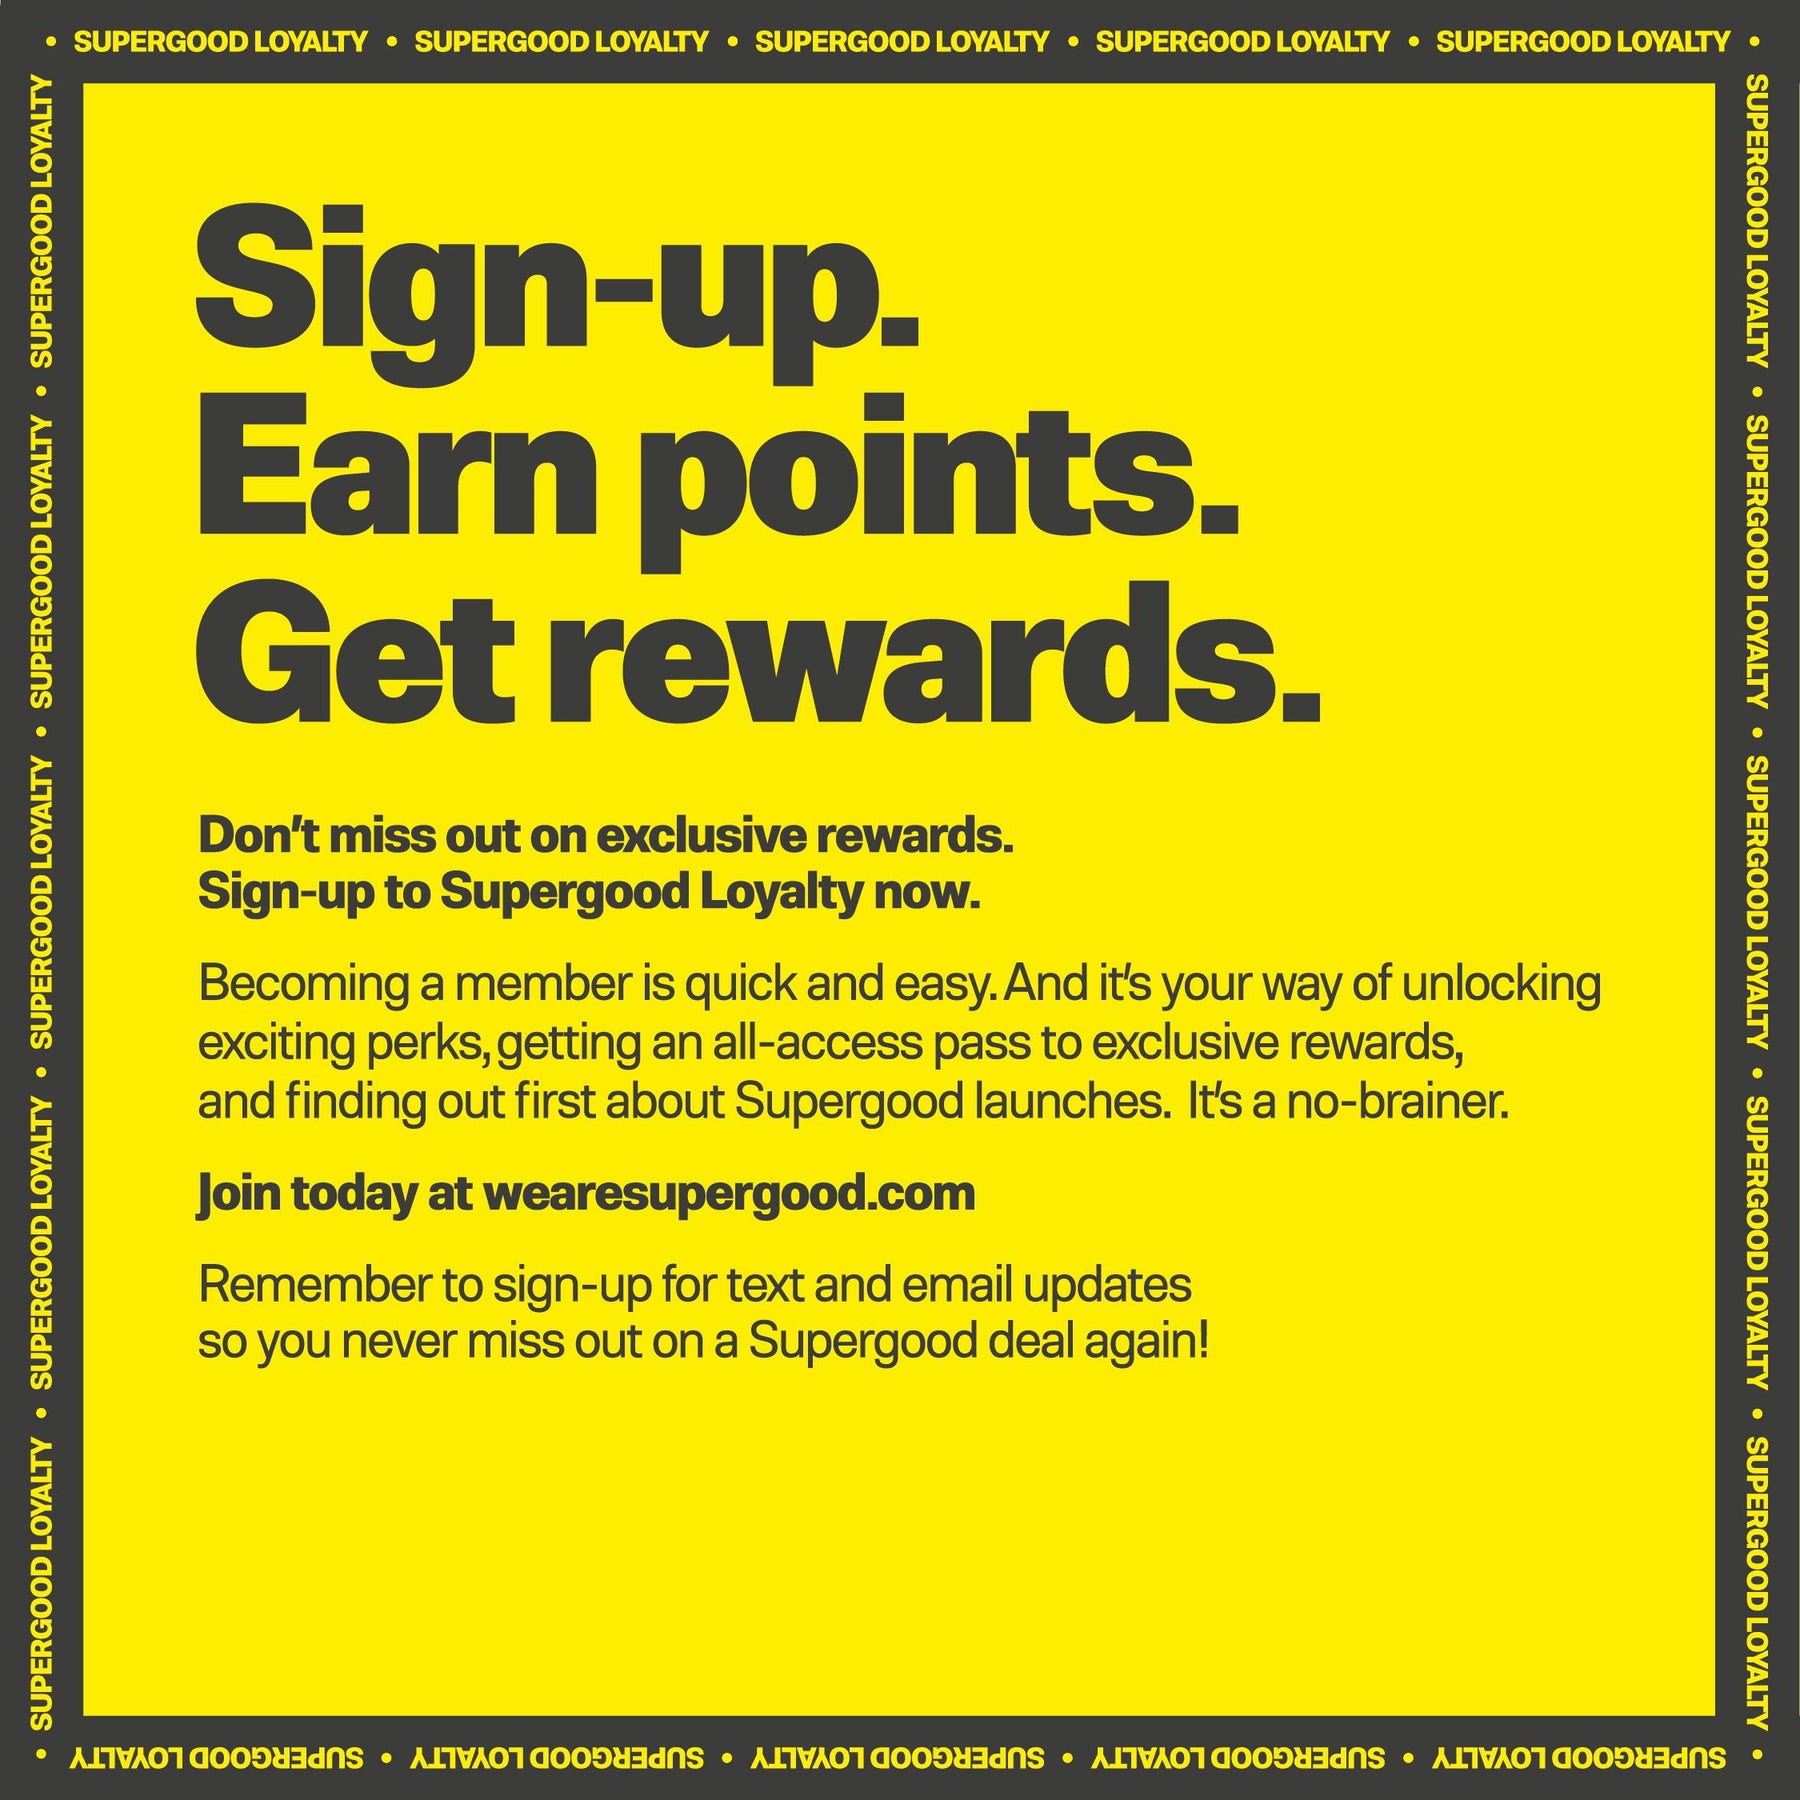 News-Sign-up. Earn points. Get rewards. | We Are Supergood.